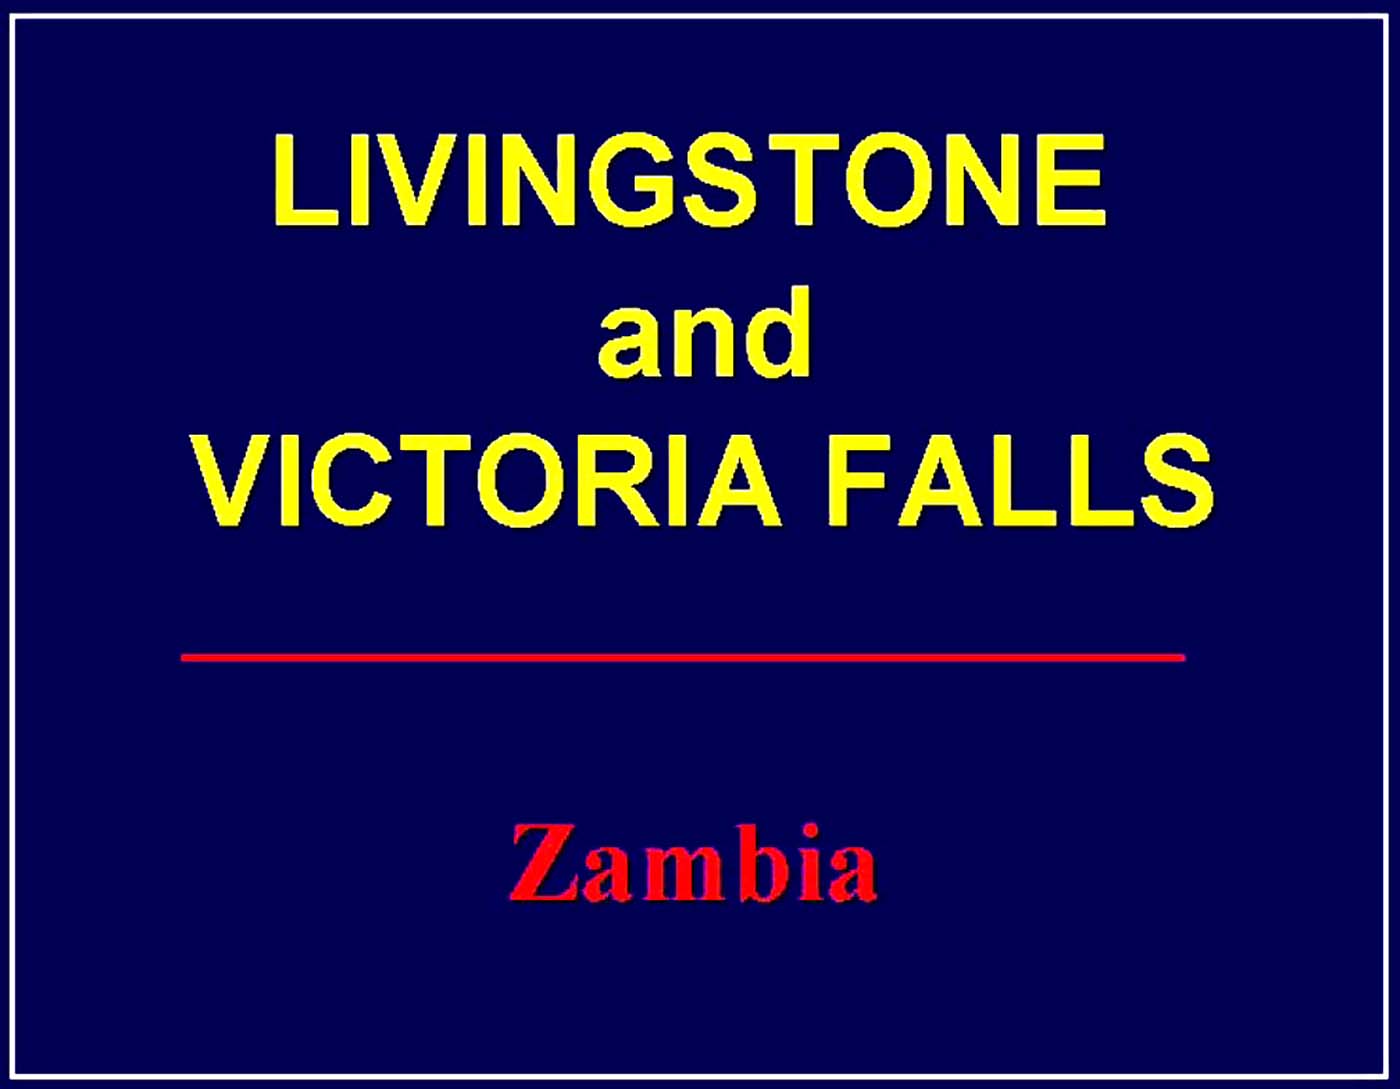 Eclipse 2001 - A30 - Title - Livingstone and Vic Falls